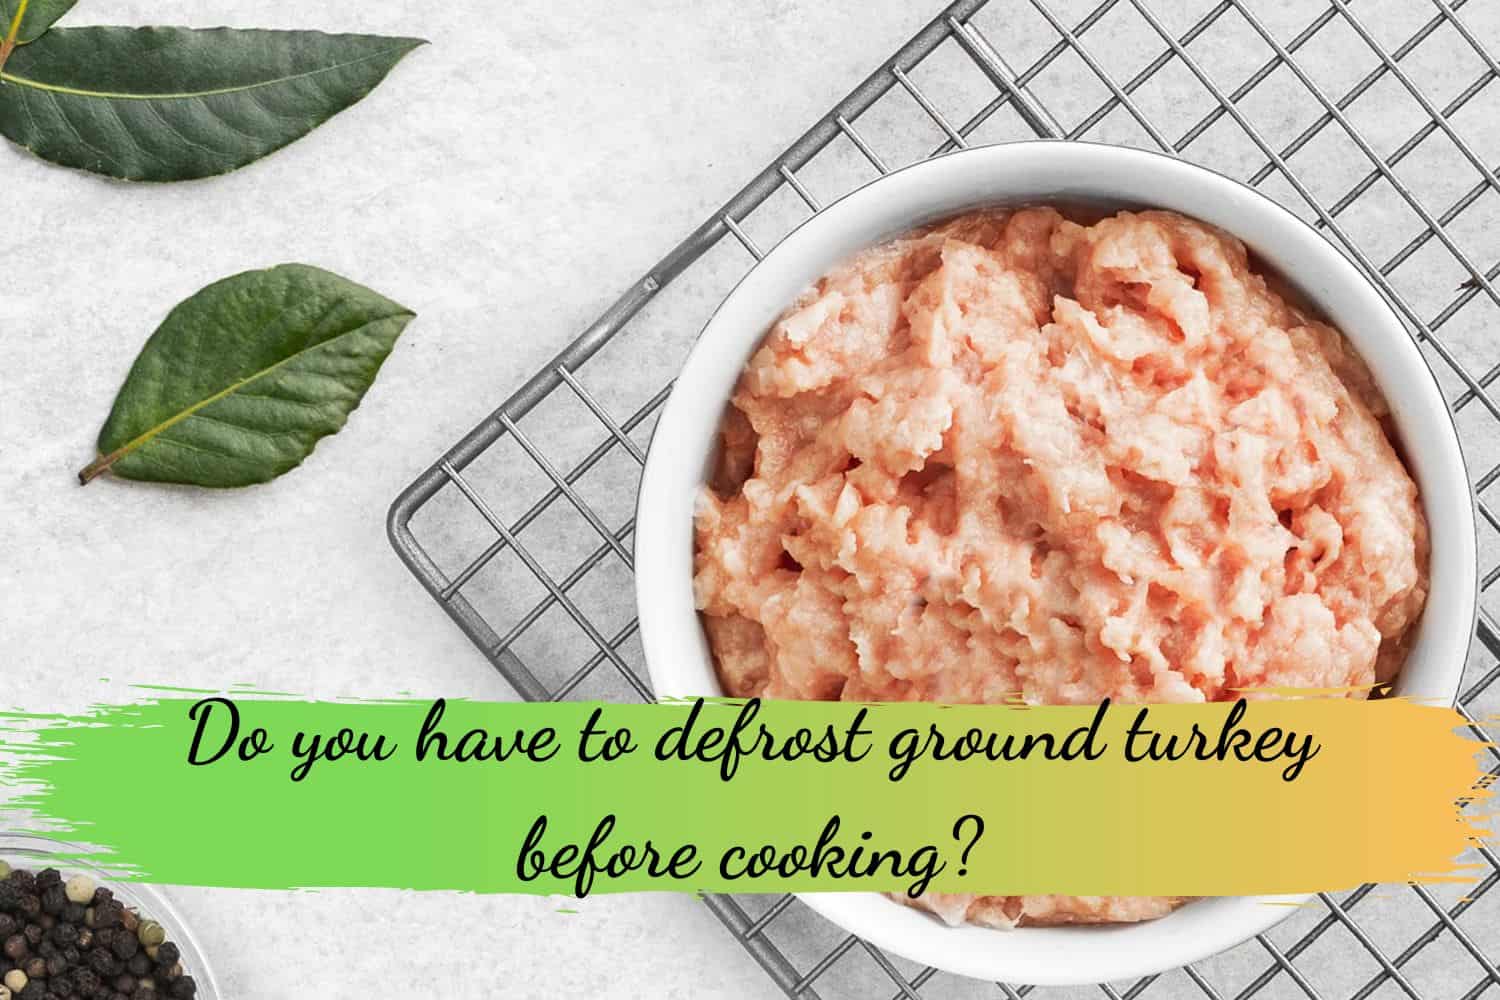 Do you have to defrost ground turkey before cooking